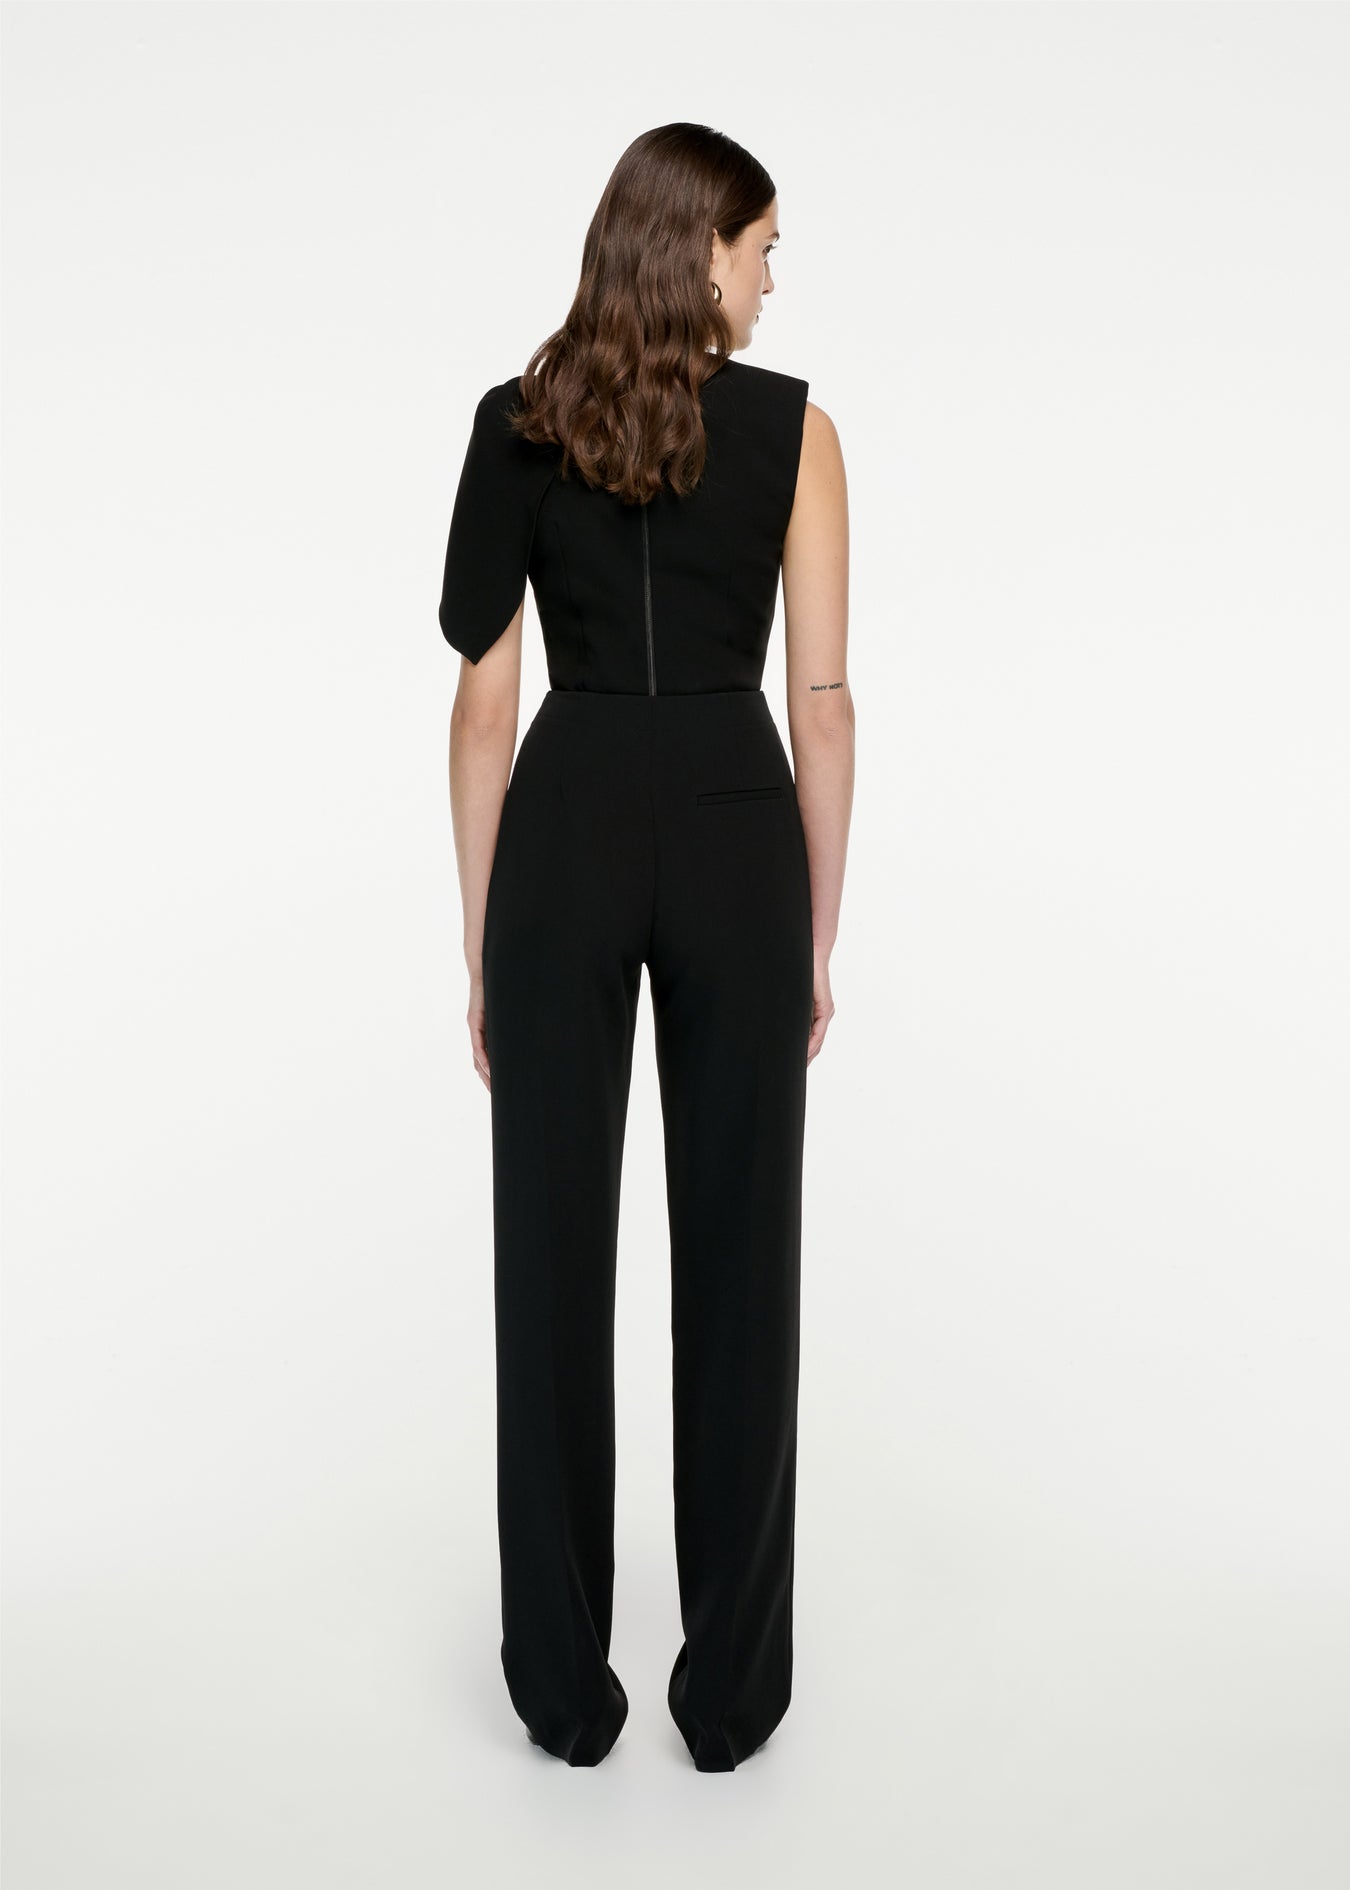 The back of a woman wearing the Stretch Cady Top in Black